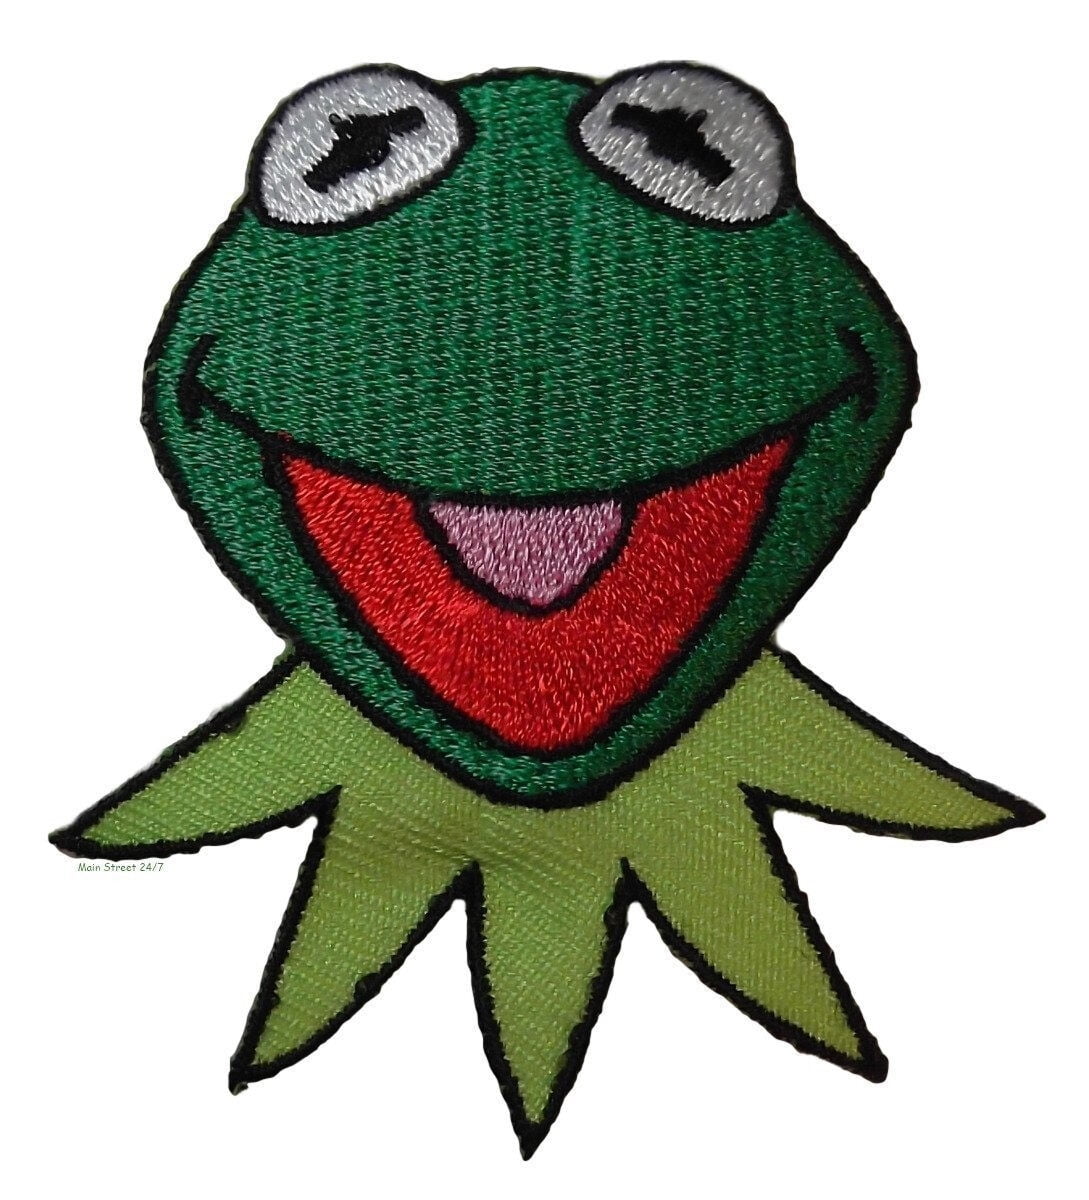 Håbefuld banner Bug The Muppets Kermit The Frog Character 2" Wide Patch - Walmart.com